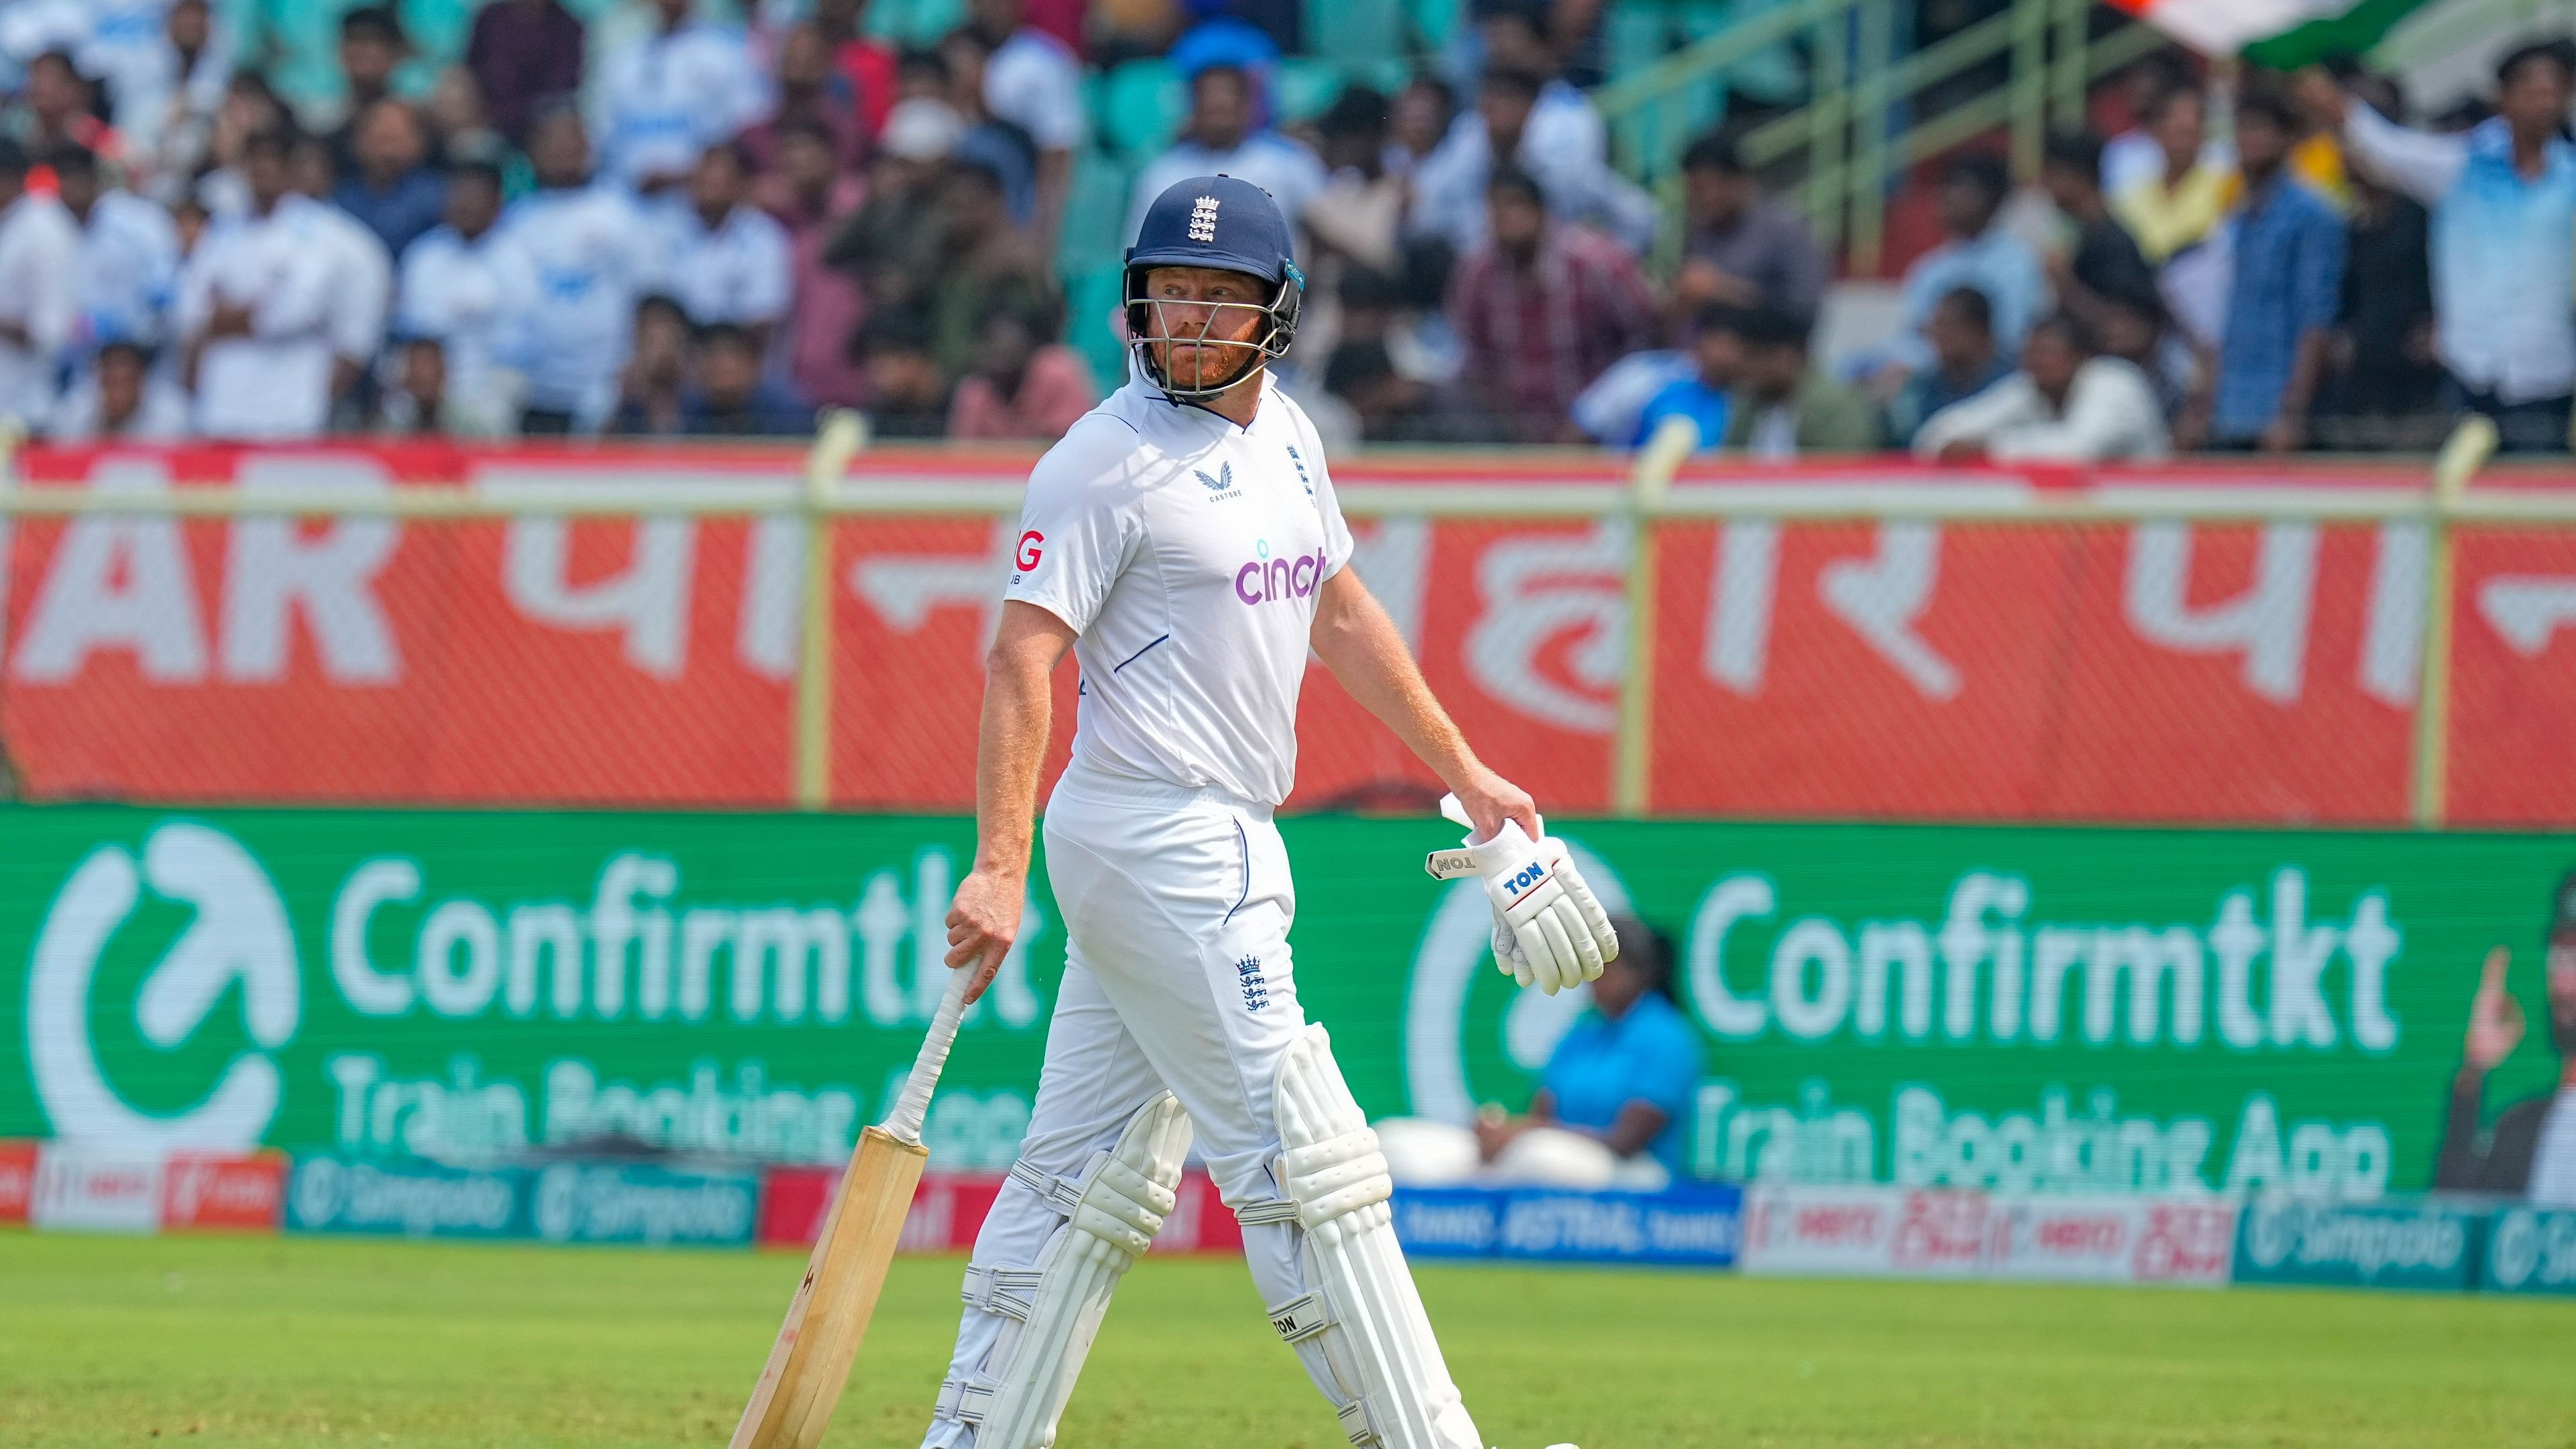 <div class="paragraphs"><p>England's batter Jonny Bairstow leaving the field after his dismissal during the fourth day of the second Test match between India and England.</p></div>